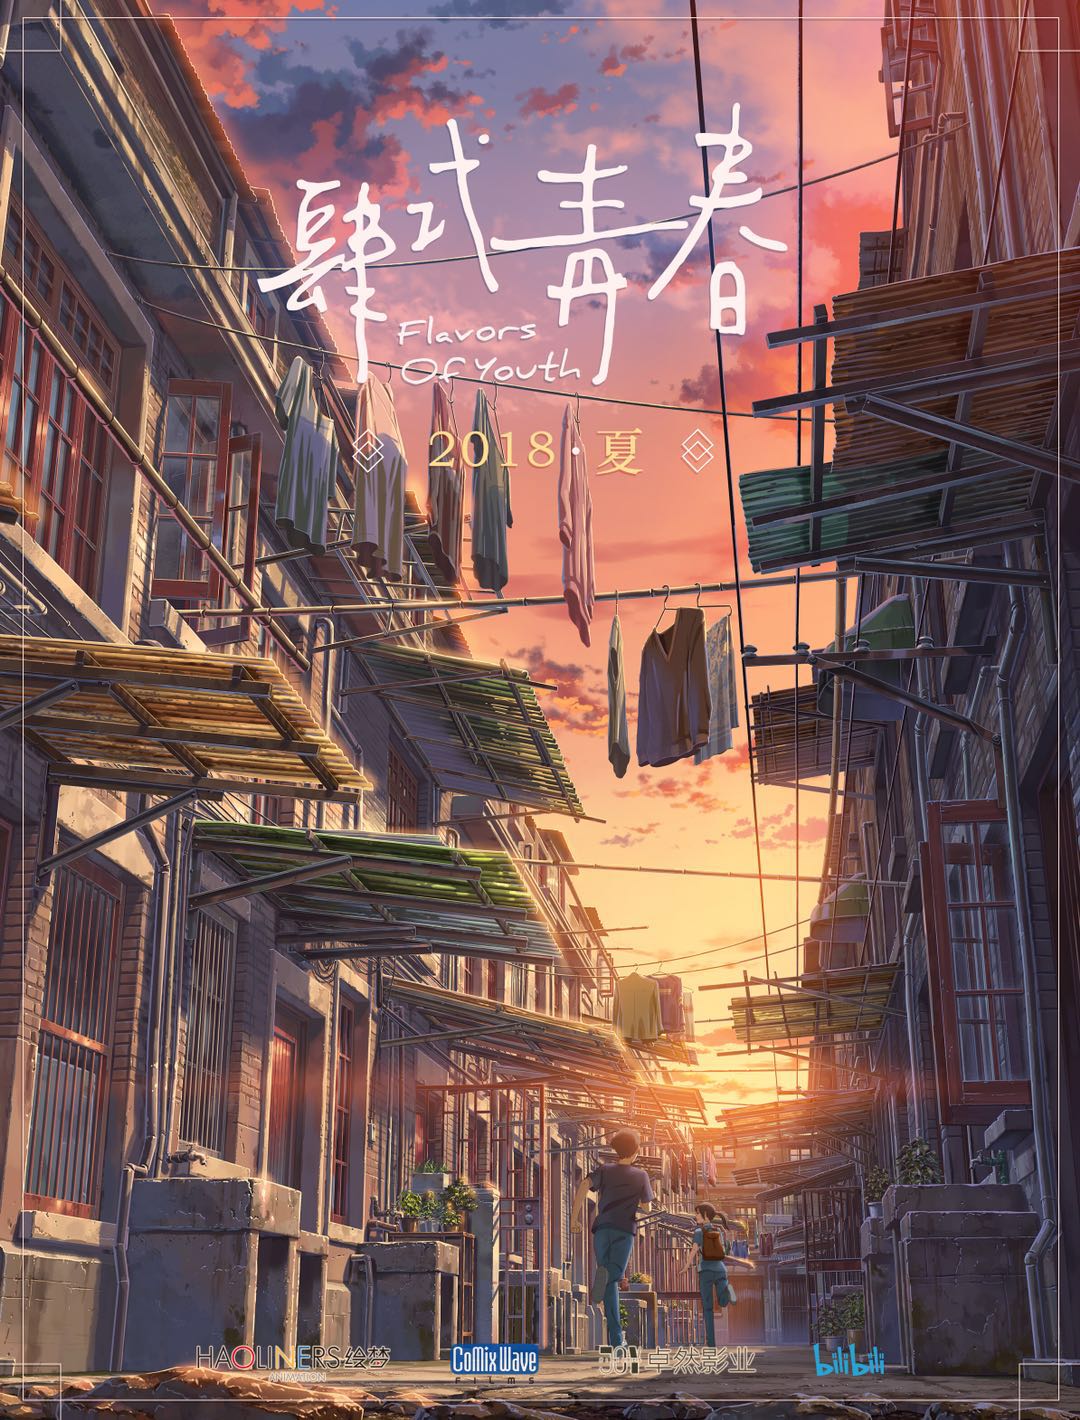 Flavors of Youth (2018) is one of the best anime movies romance